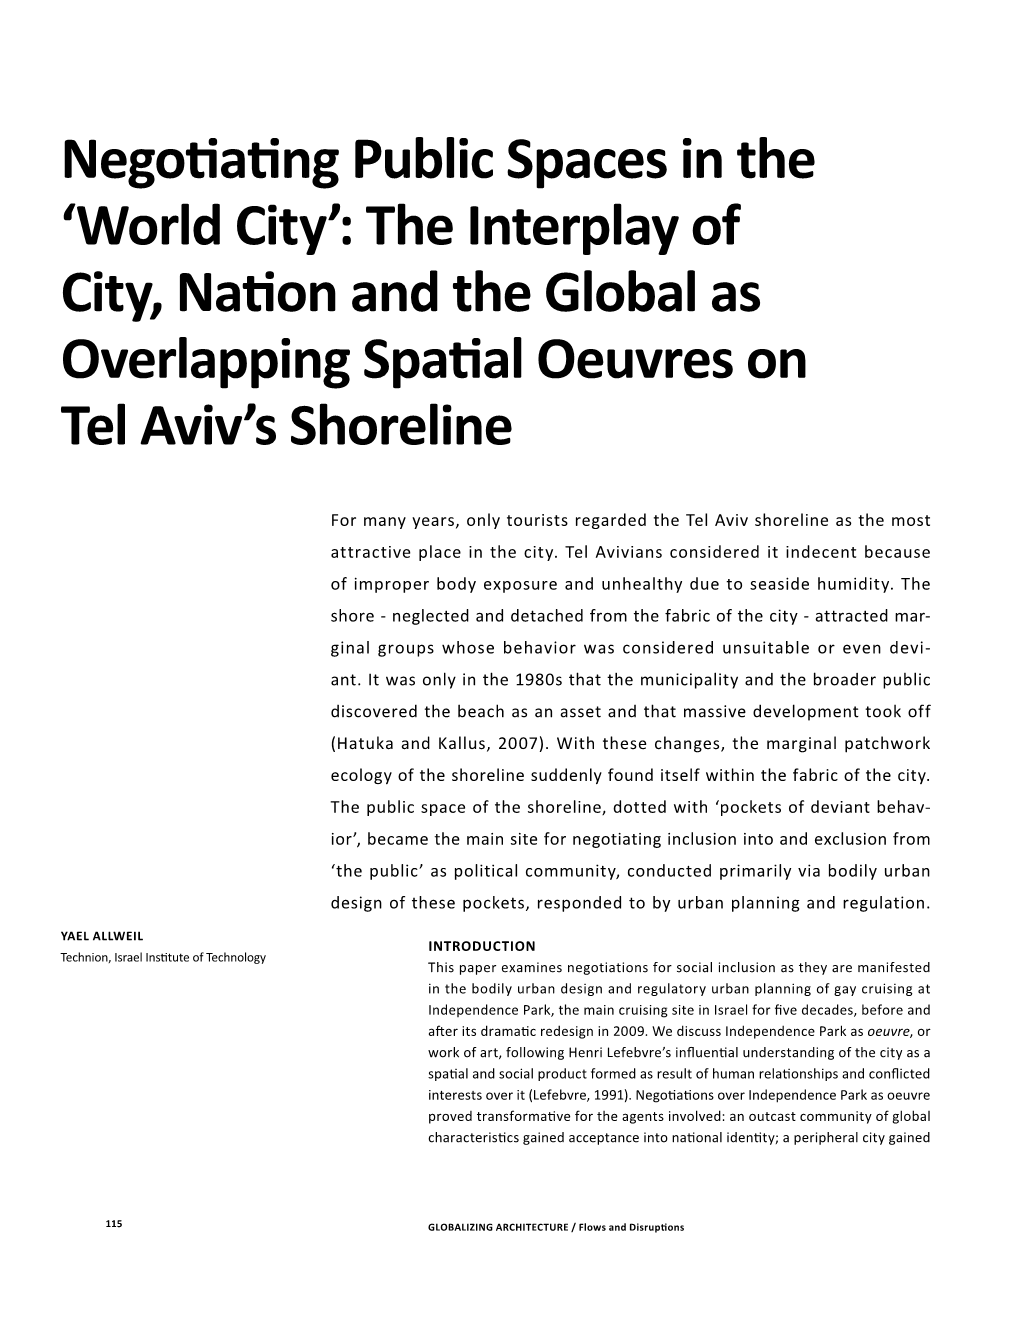 The Interplay of City, Nation and the Global As Overlapping Spatial Oeuvres on Tel Aviv’S Shoreline